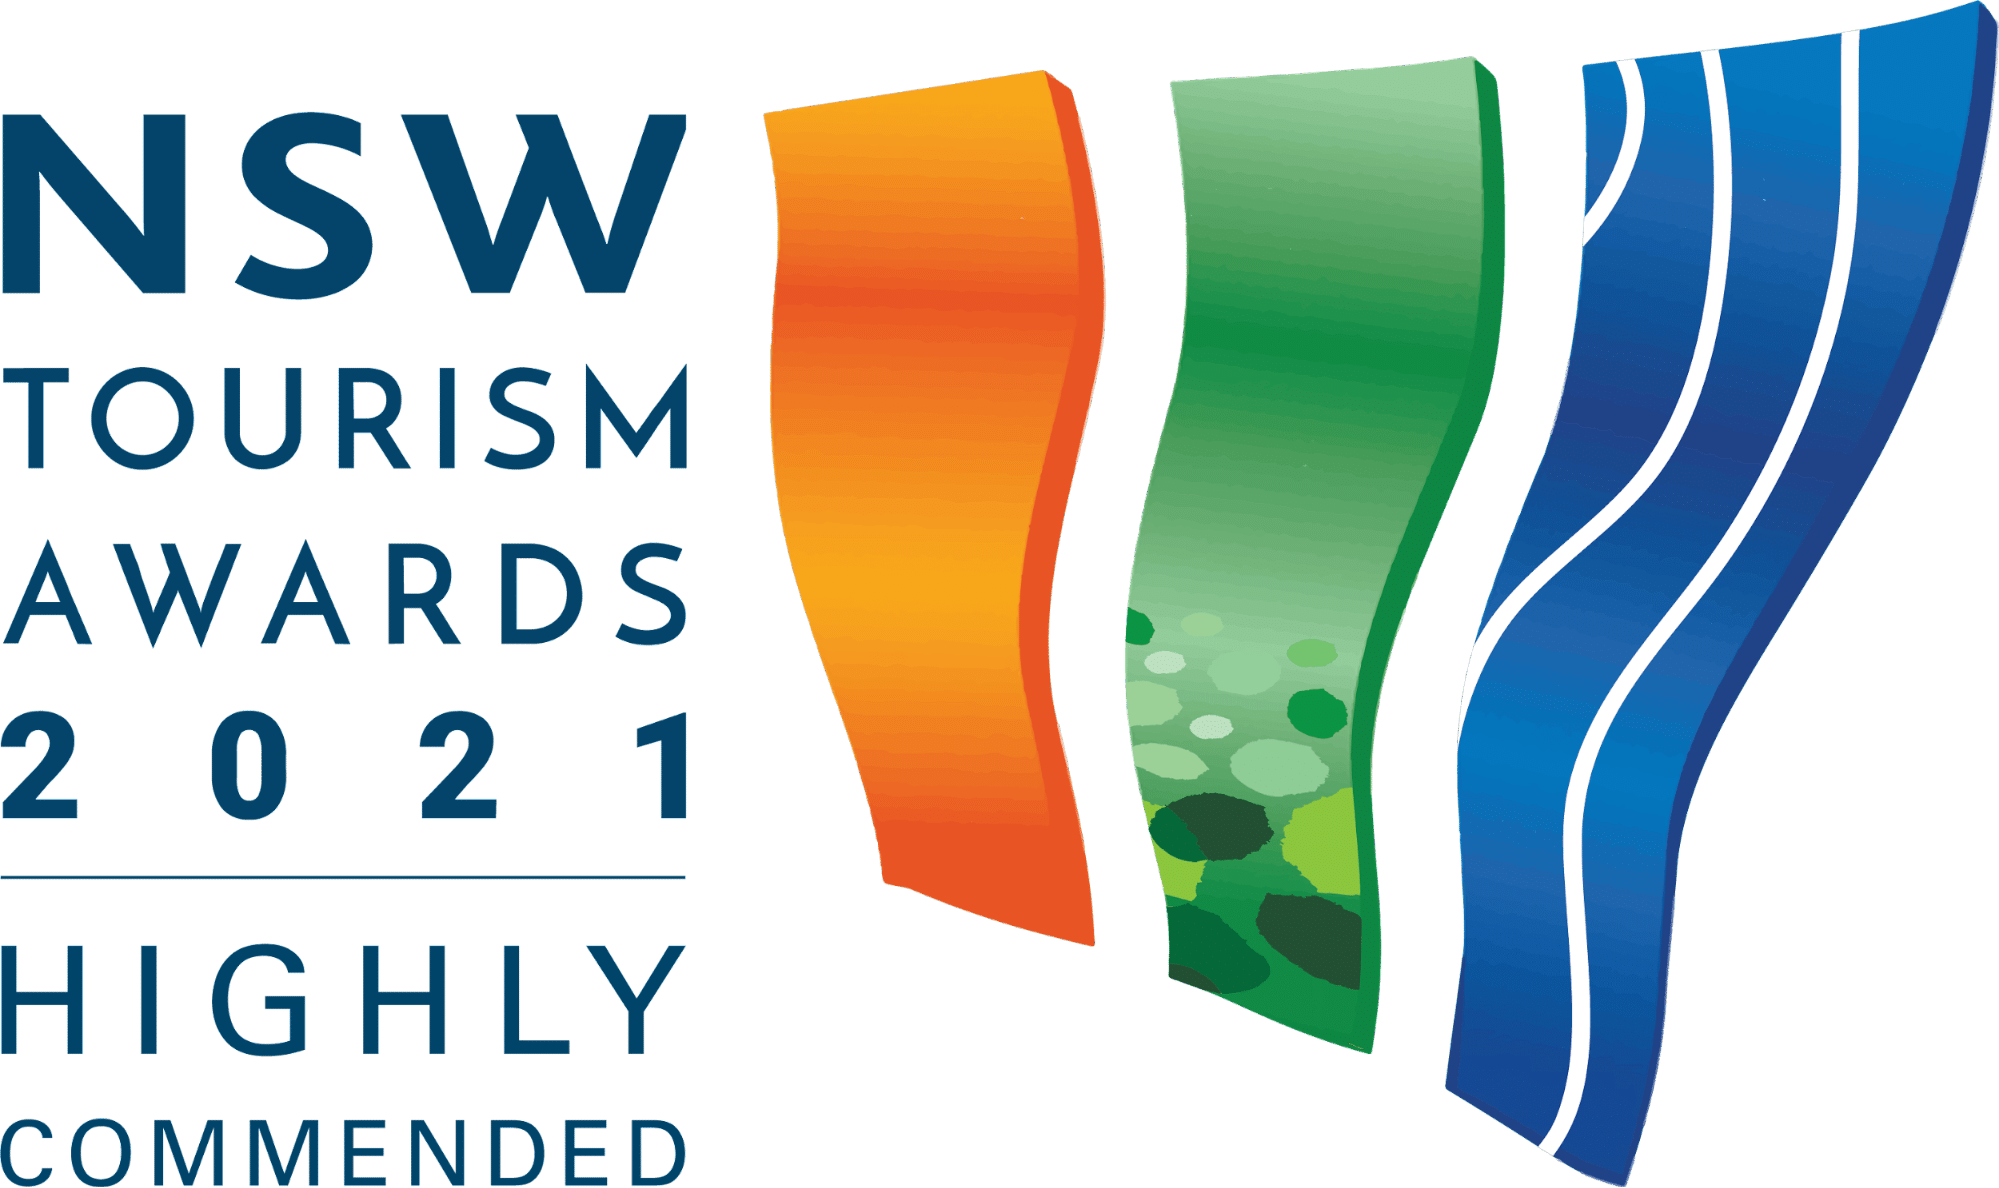 NSW tourism awards 2021 highly commended